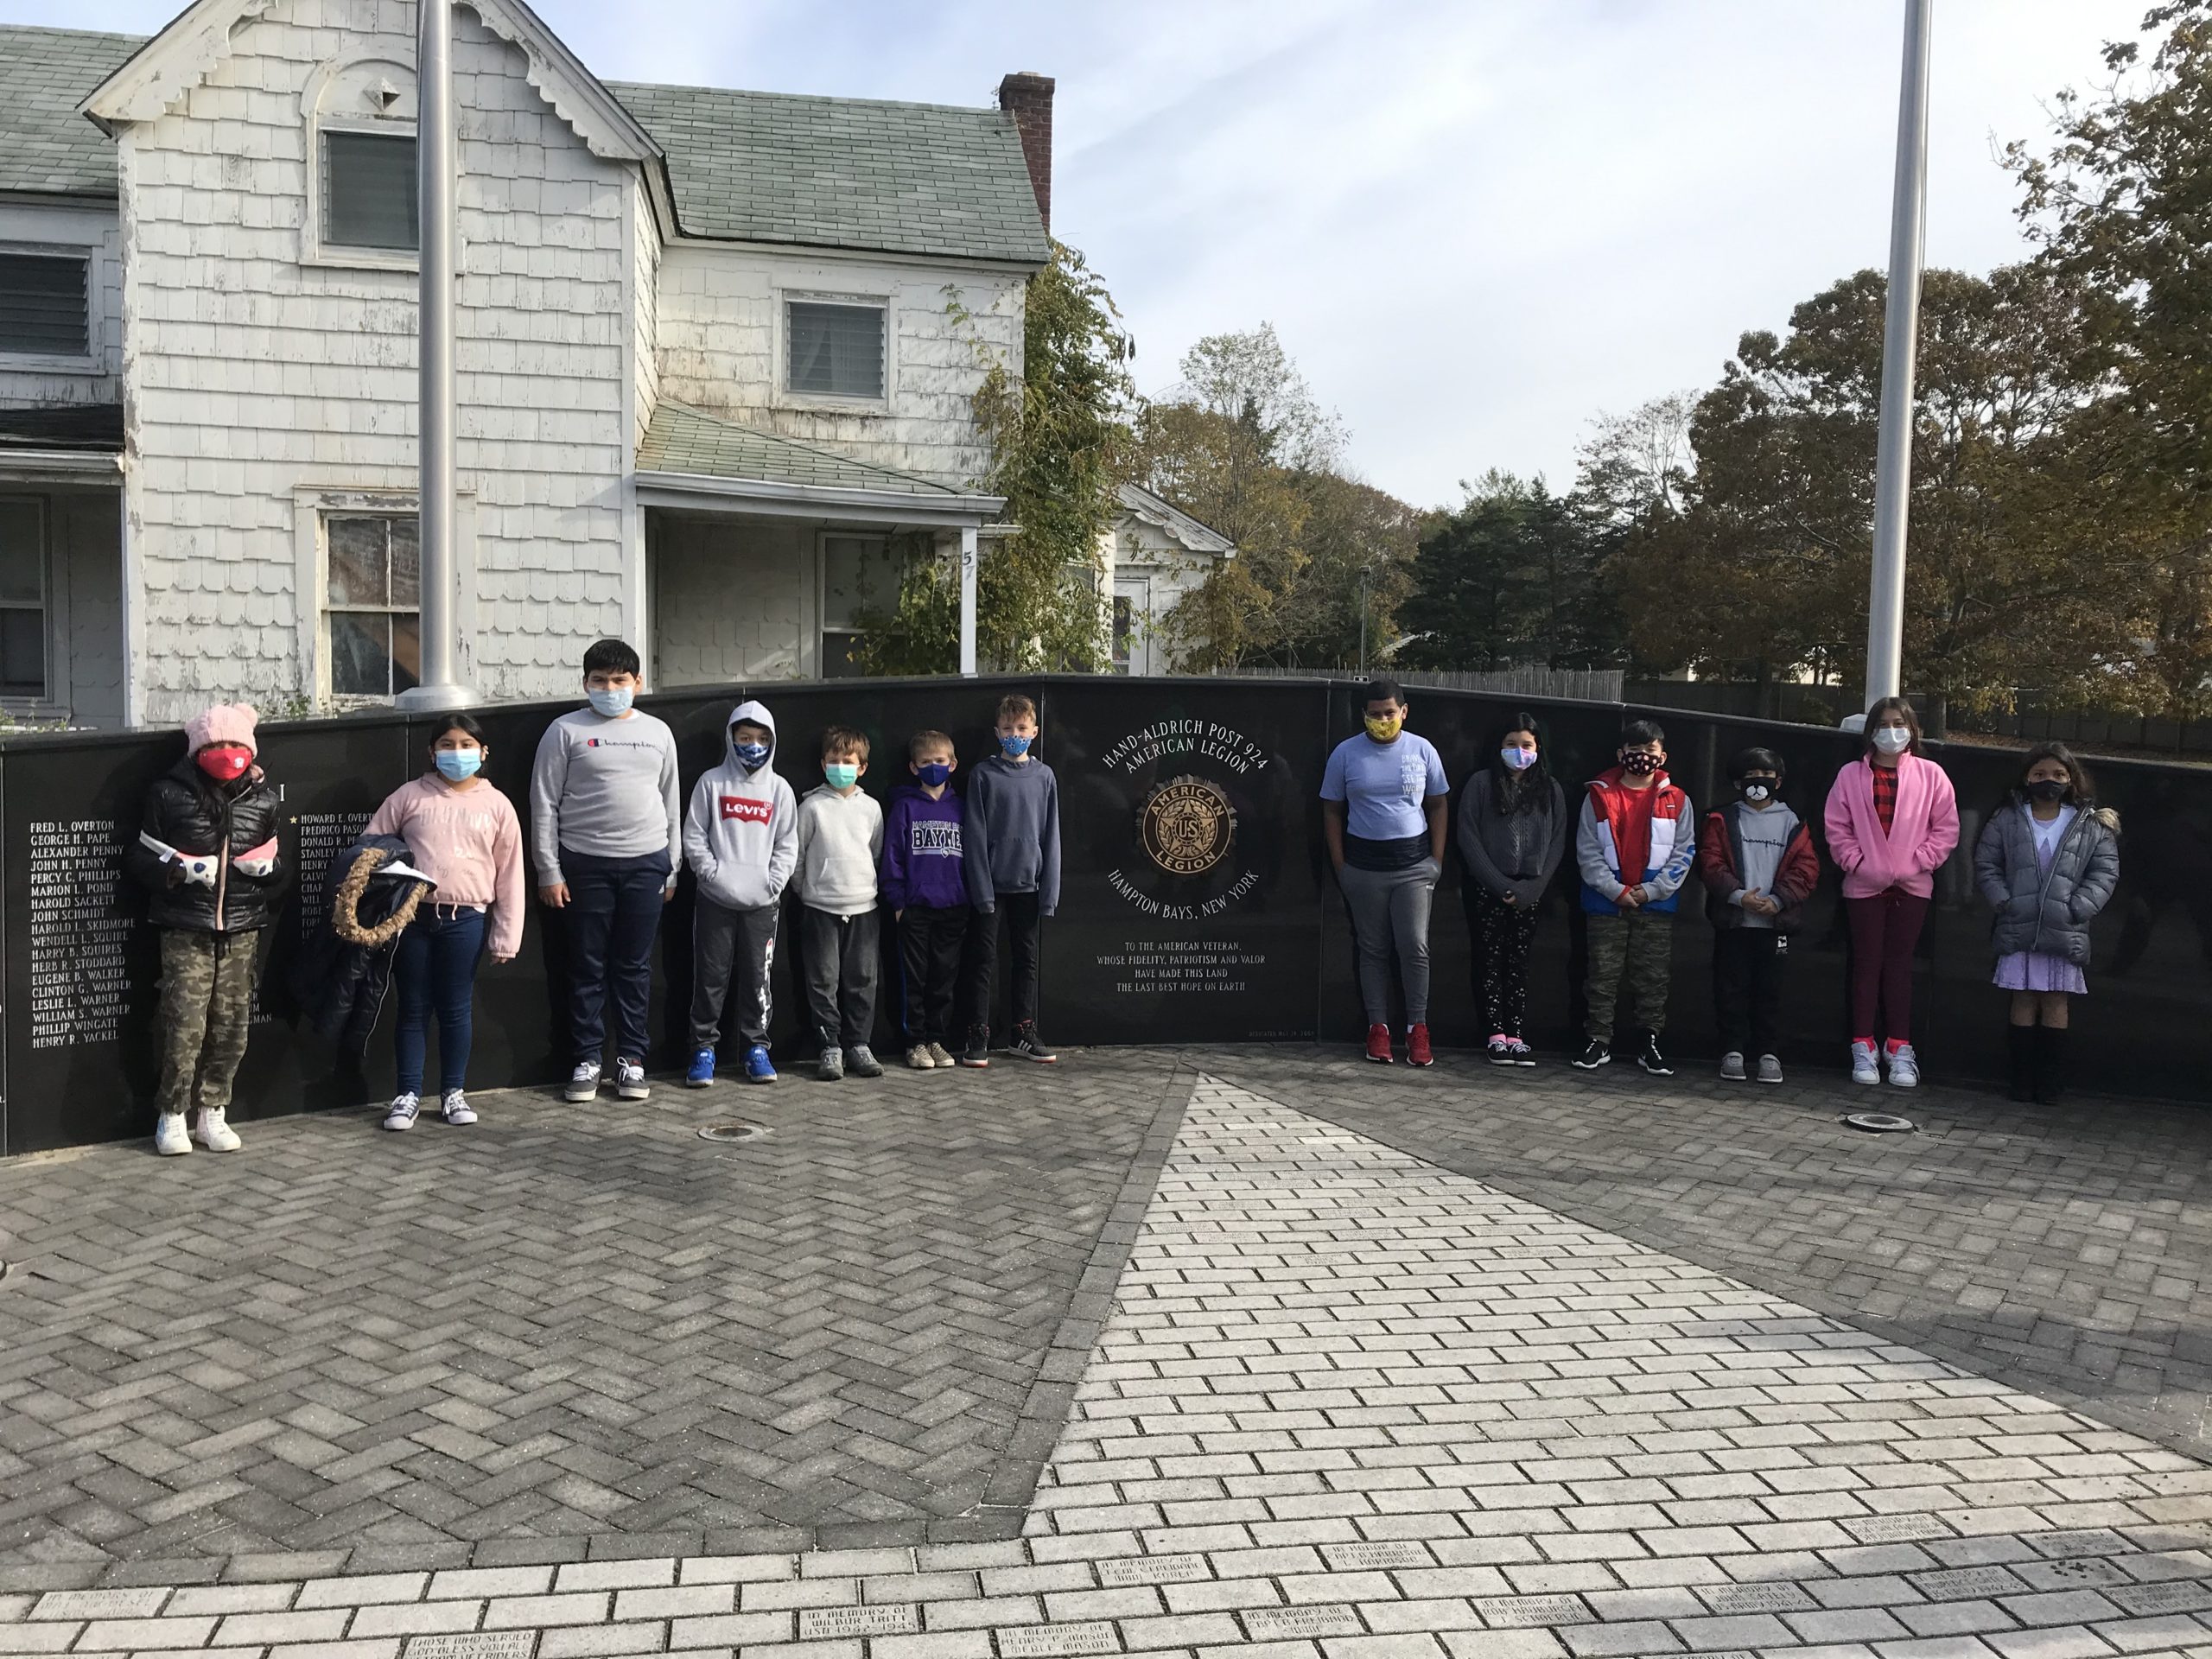 As part of a Veterans Day celebration, fourth grade students at Hampton Bays Elementary School took a walking field trip to the community’s veterans memorial at the American Legion Post 924 on Ponquogue Avenue. Students learned more about the memorial and spent time speaking with local veterans.